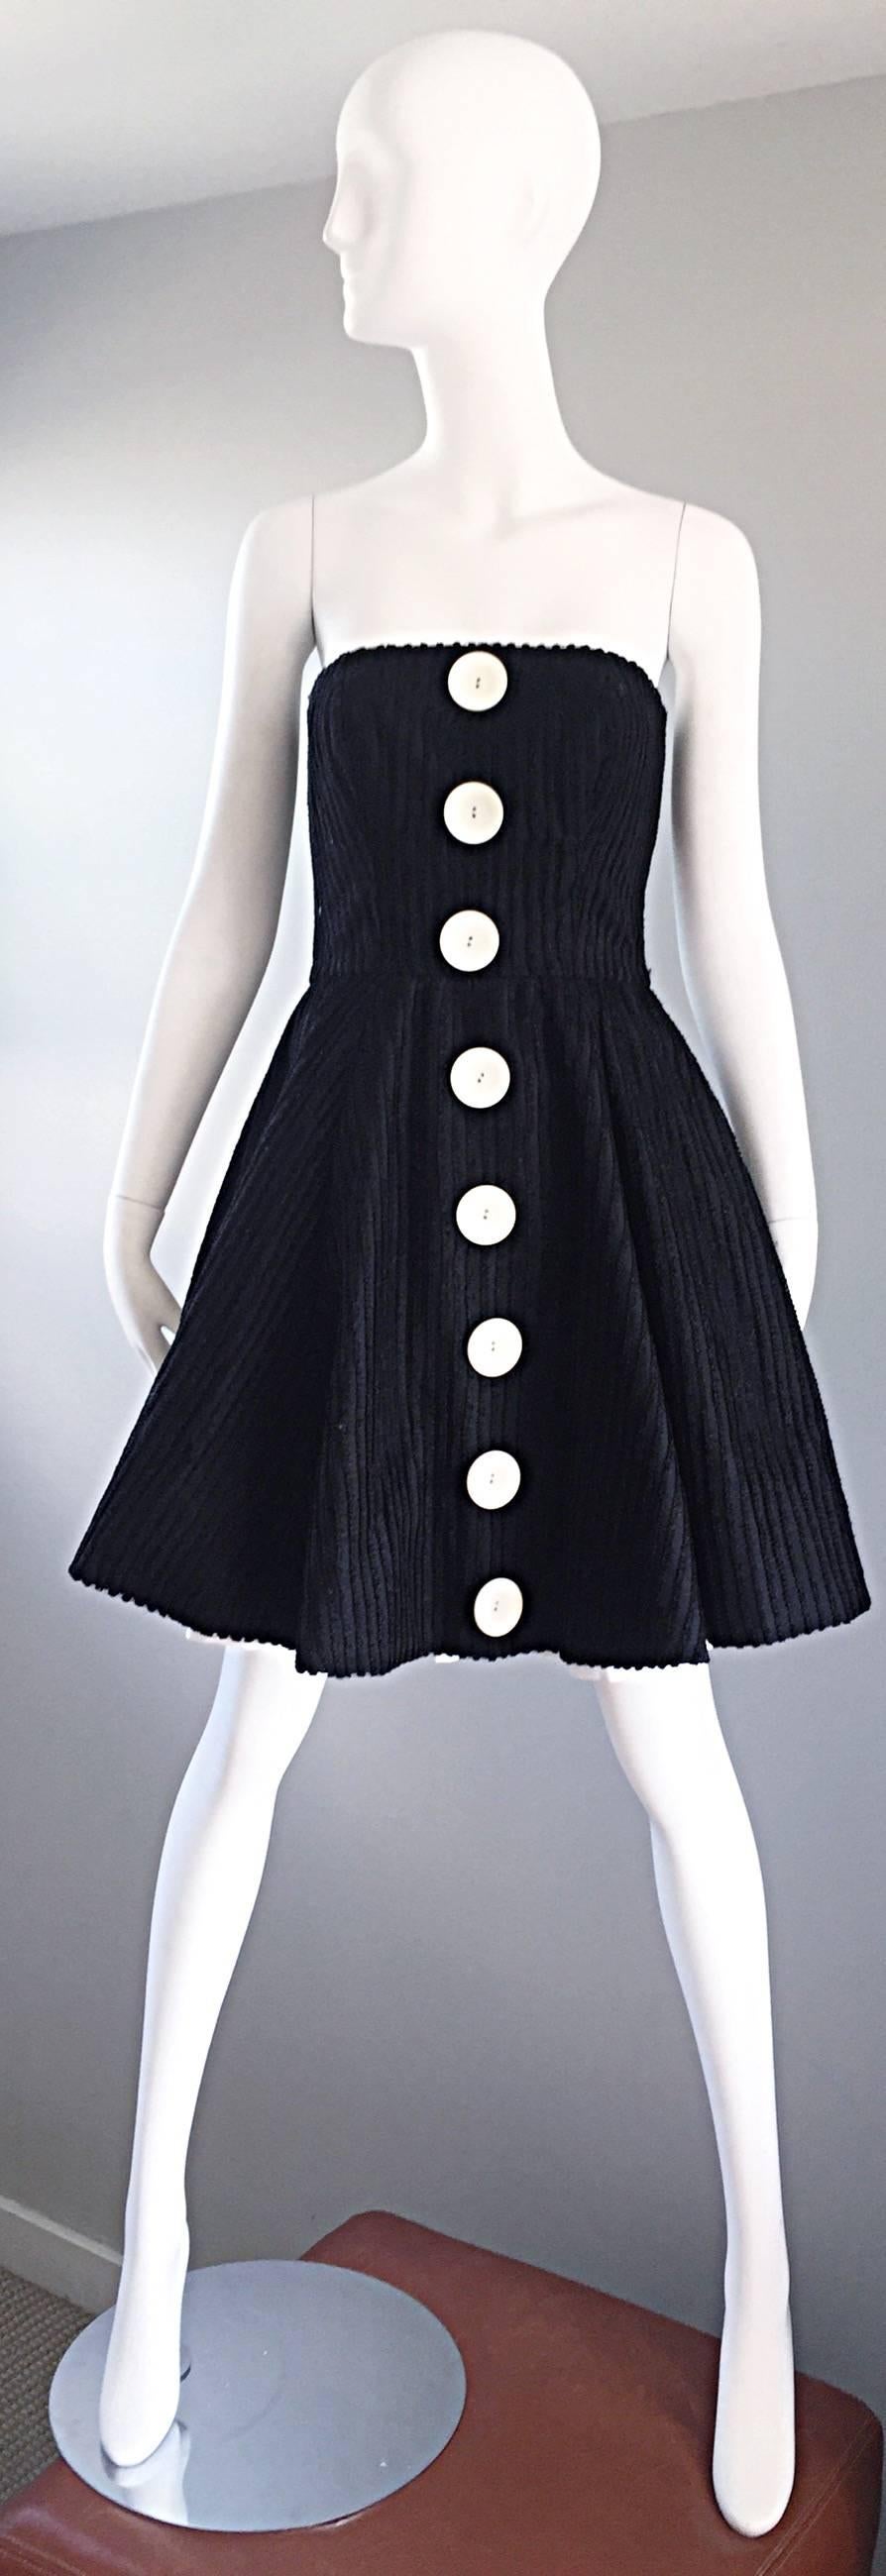 Sensational 1990s vintage CHRISTIAN LACROIX Couture black and white dress! Features a black silk and cotton netting throughout. Five oversized mock buttons up the front. Built in interior support to keep everything in place. Hidden zipper up the